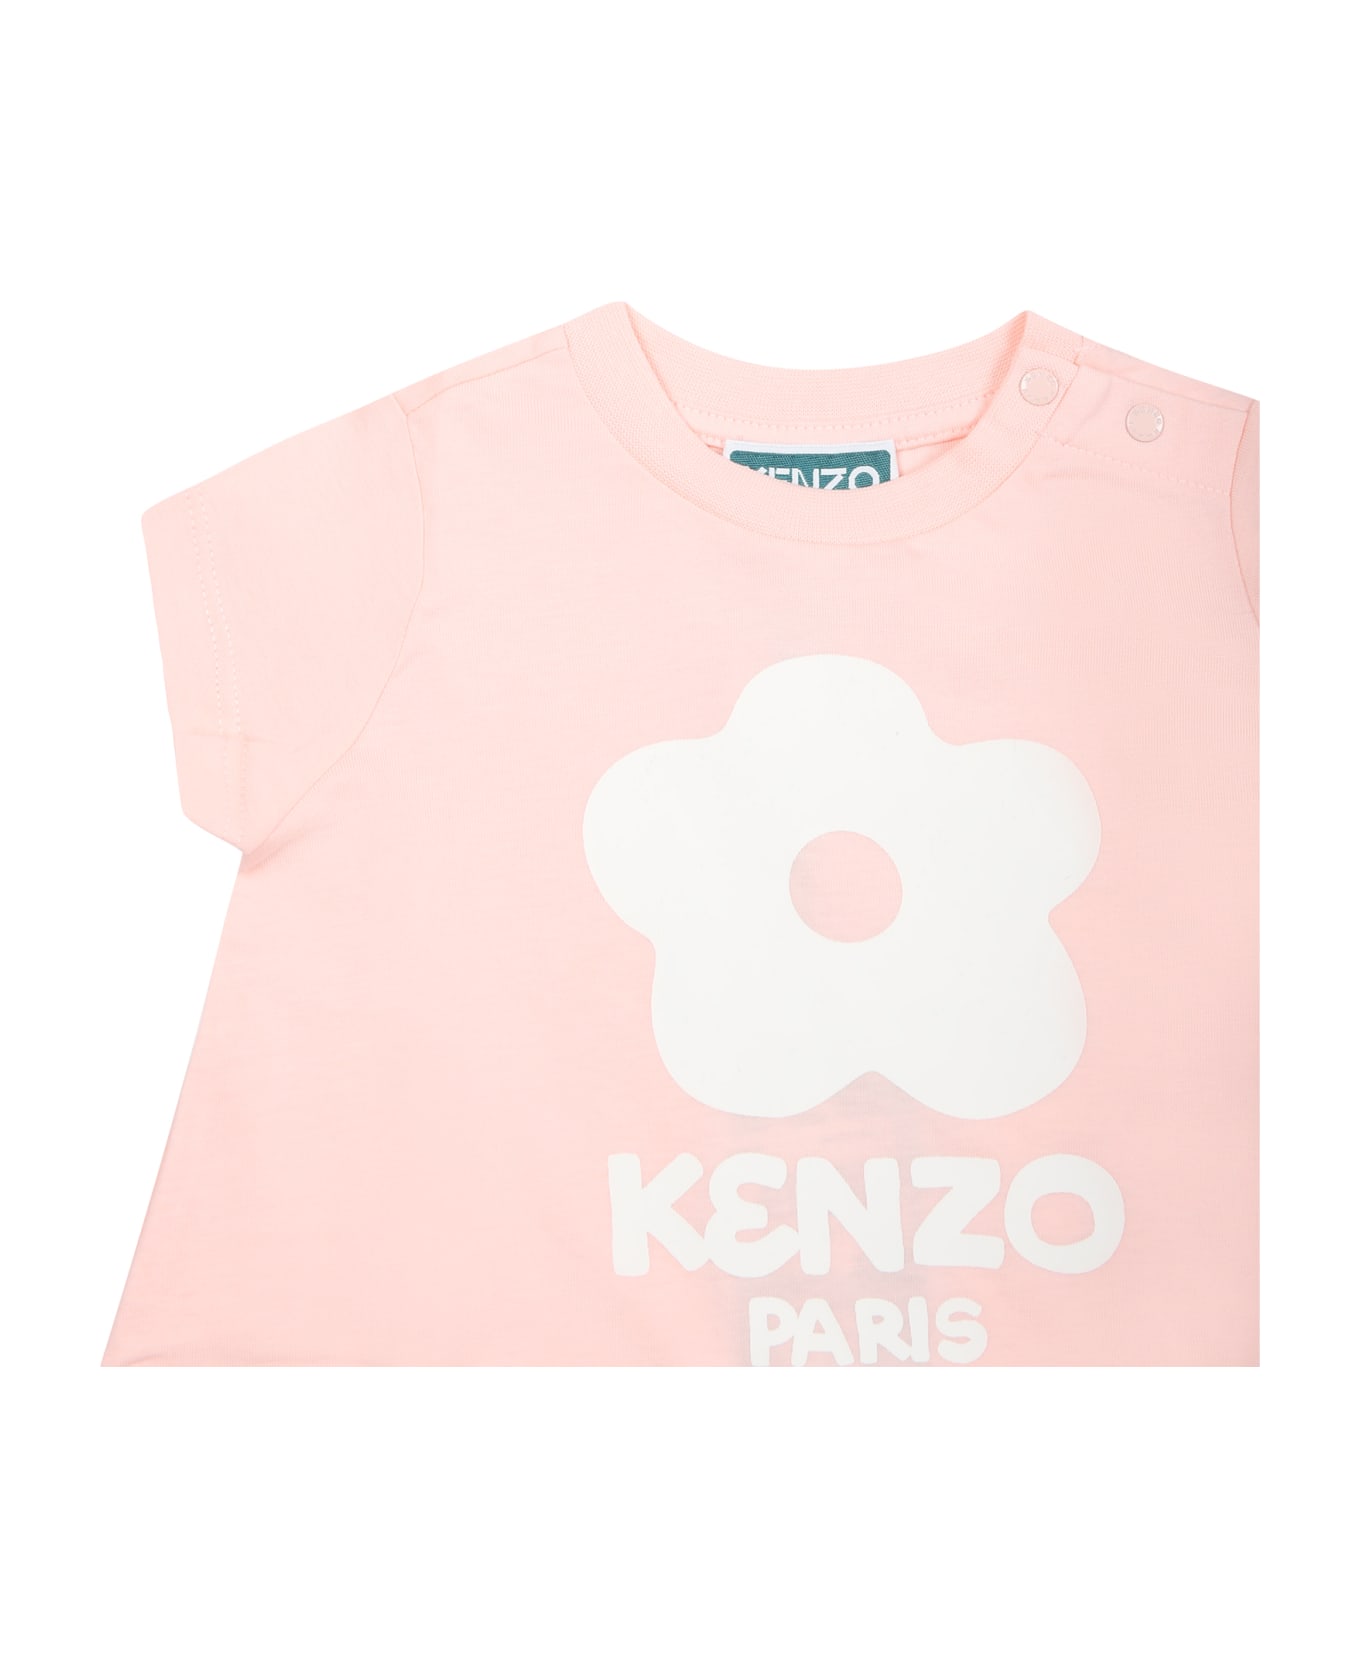 Kenzo Kids Pink T-shirt For Baby Girl With Boke Flower - Pink